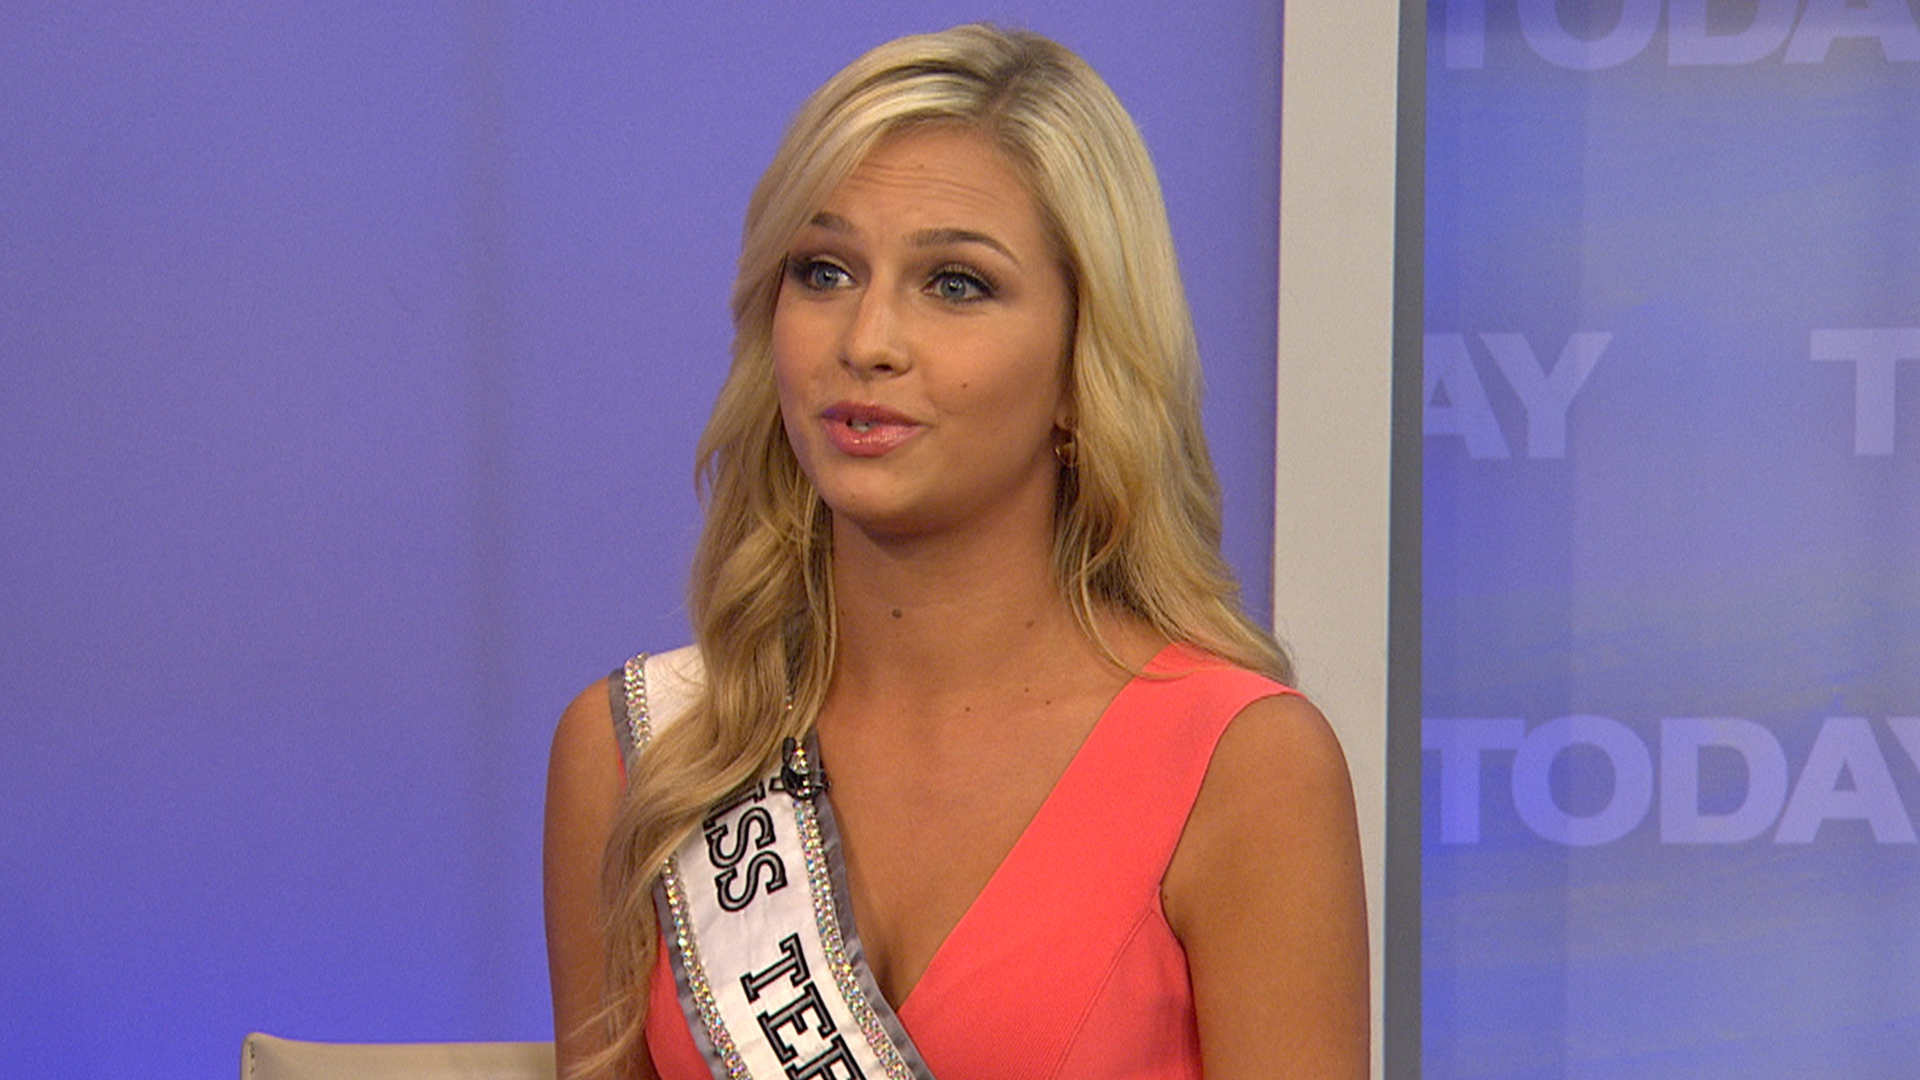 Miss Teen USA has mixed emotions after arrest of 